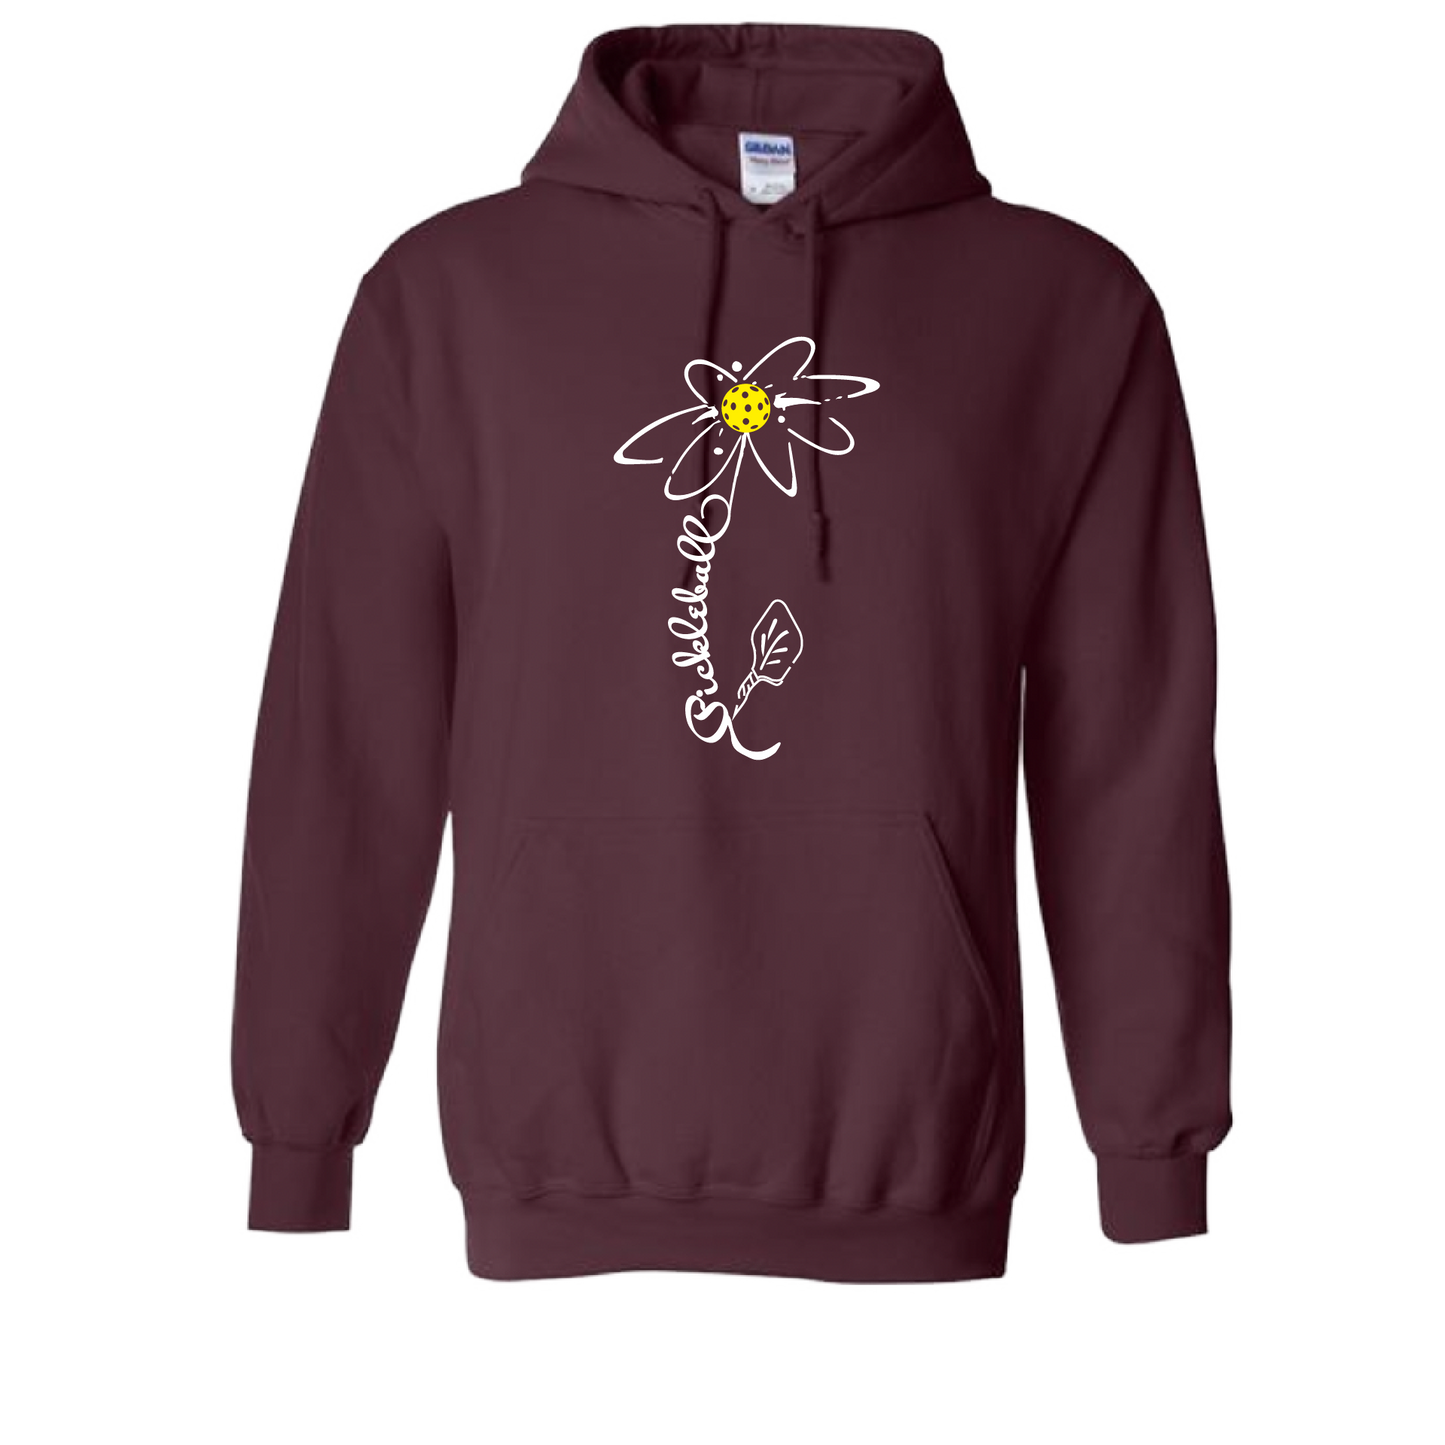 Pickleball Design: Pickleball Flower  Unisex Hooded Sweatshirt: Moisture-wicking, double-lined hood, front pouch pocket.  This unisex hooded sweatshirt is ultra comfortable and soft. Stay warm on the Pickleball courts while being that hit with this one of kind design.